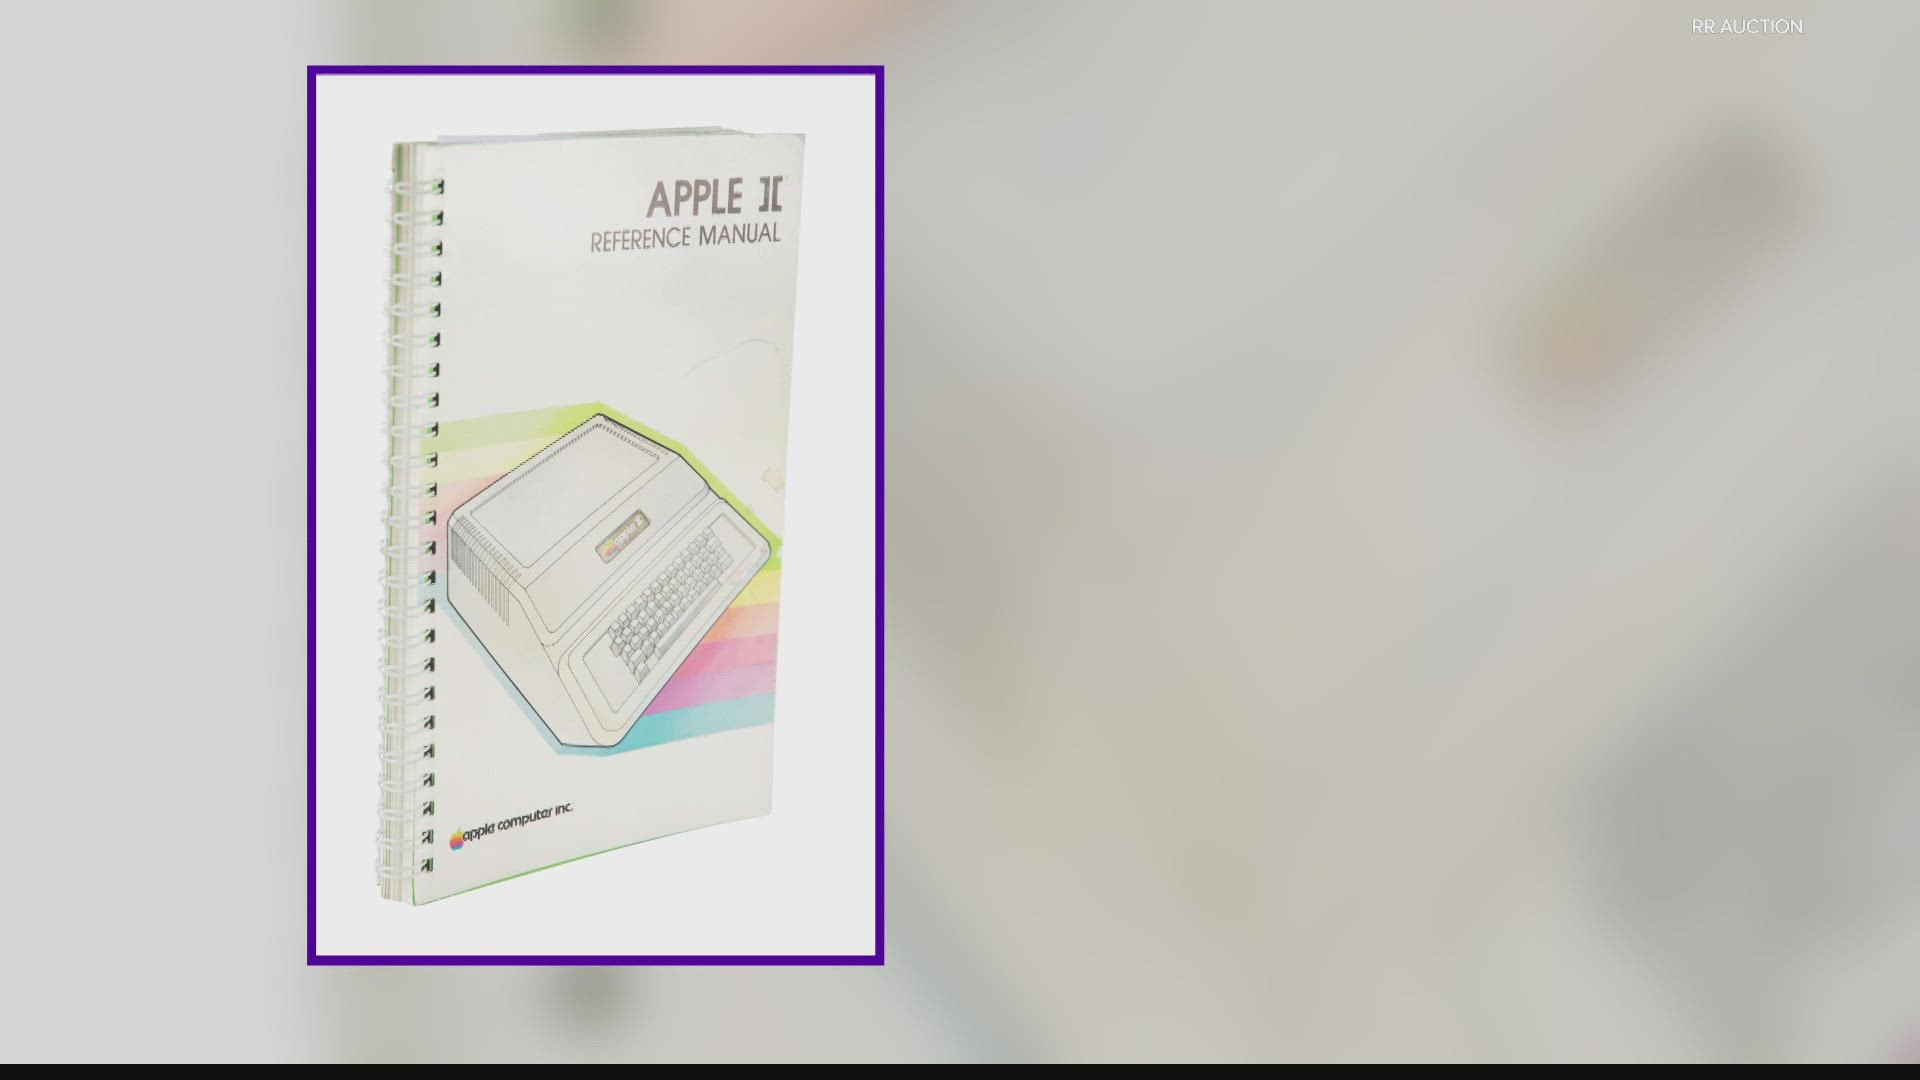 The manual's recipient was the son of an Apple executive.